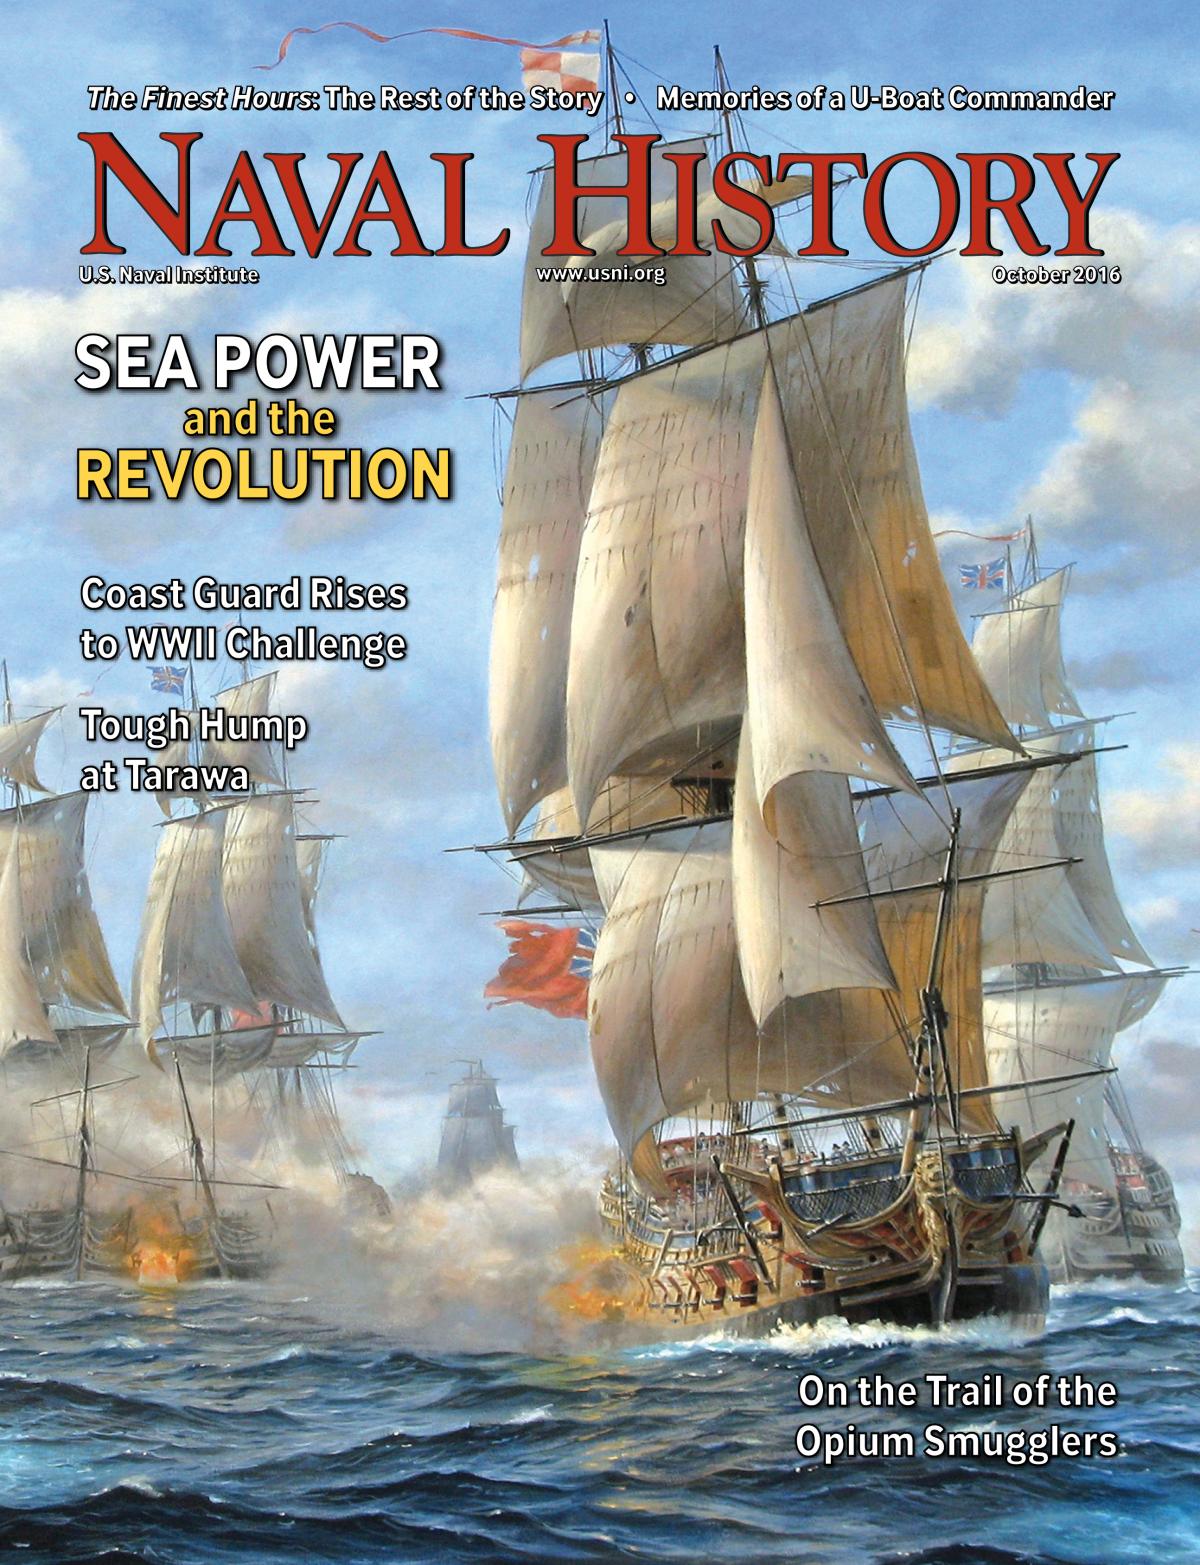 Naval History Magazine - October 2016 Volume 30, Number 5 Cover